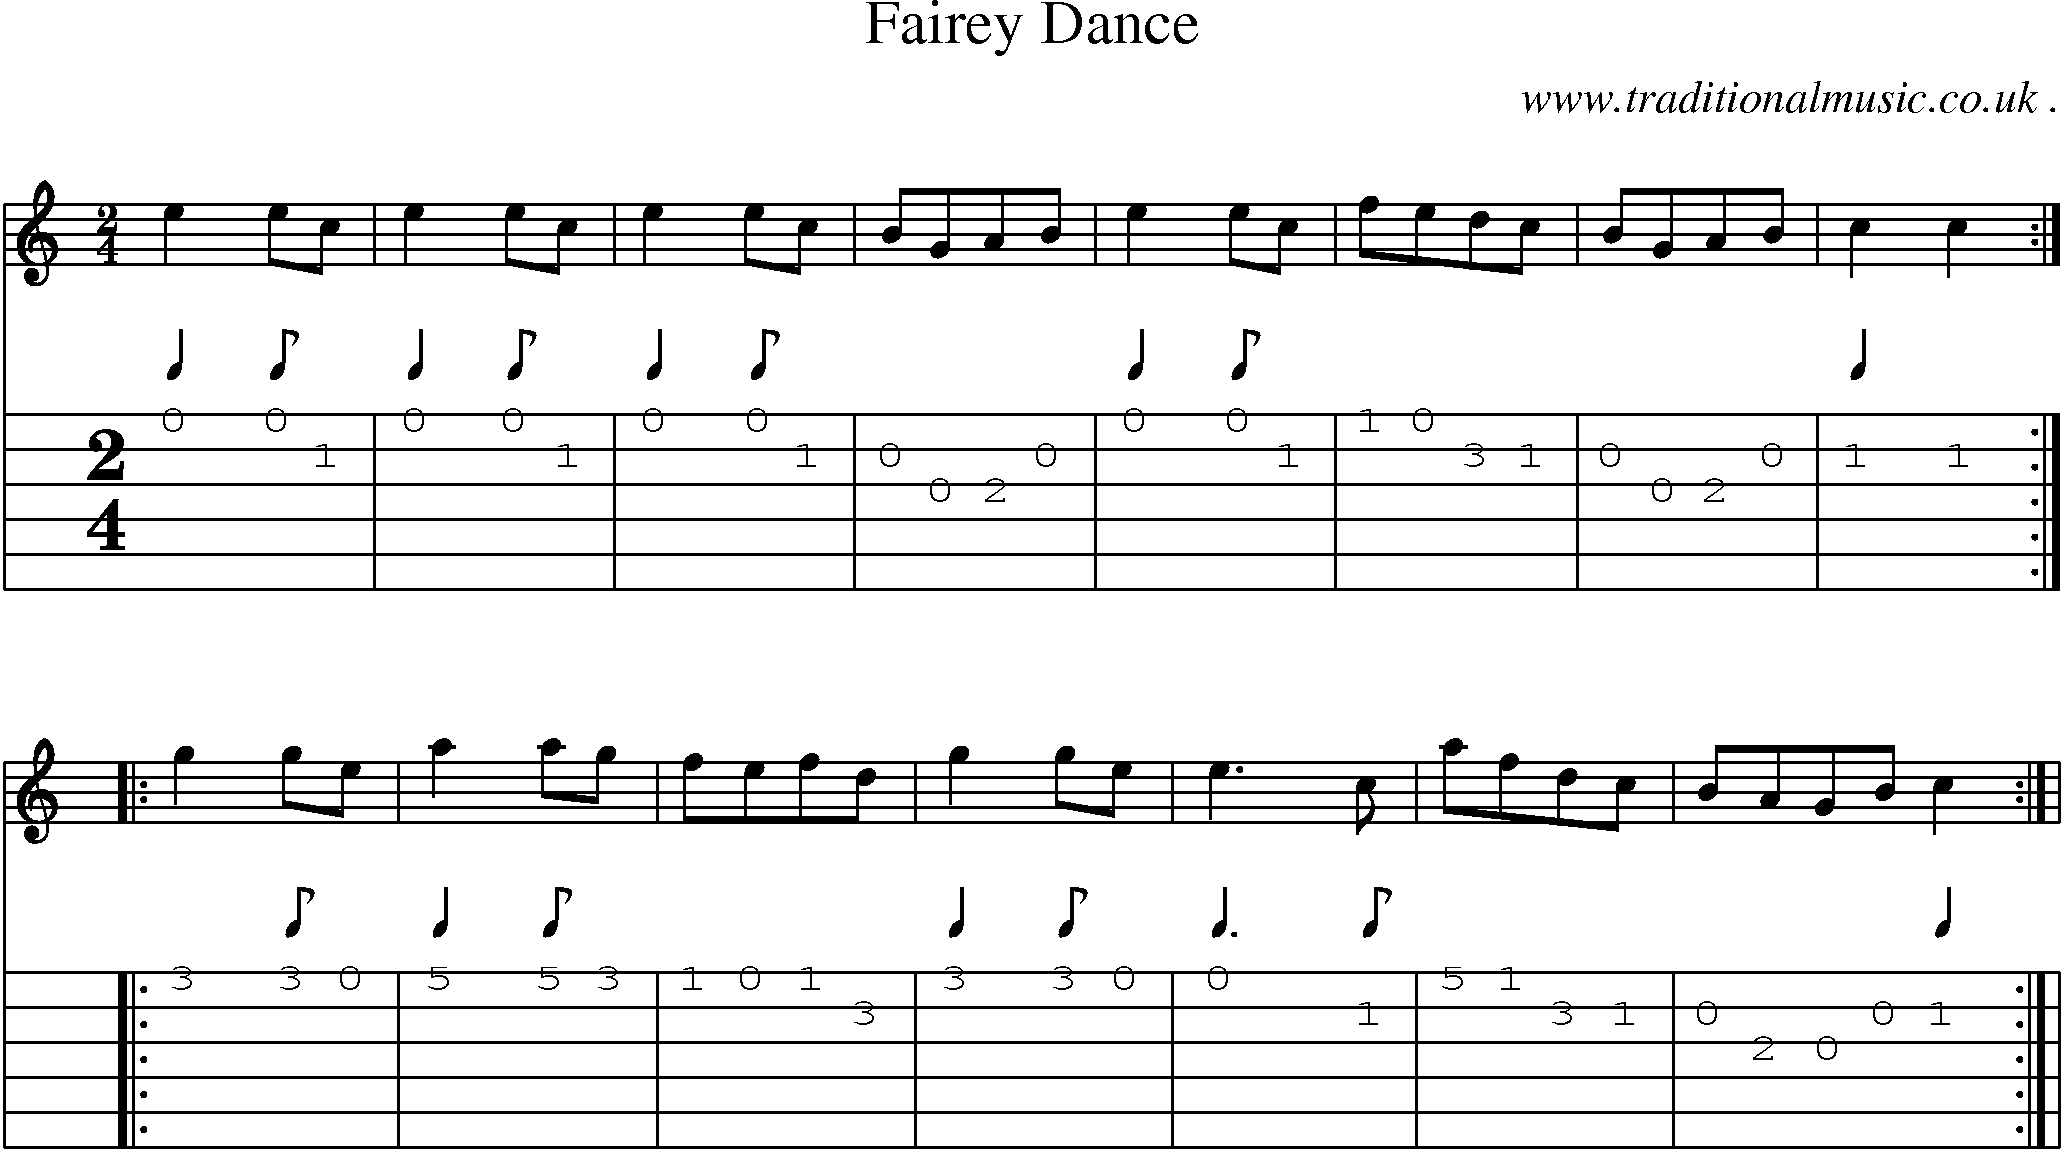 Sheet-Music and Guitar Tabs for Fairey Dance